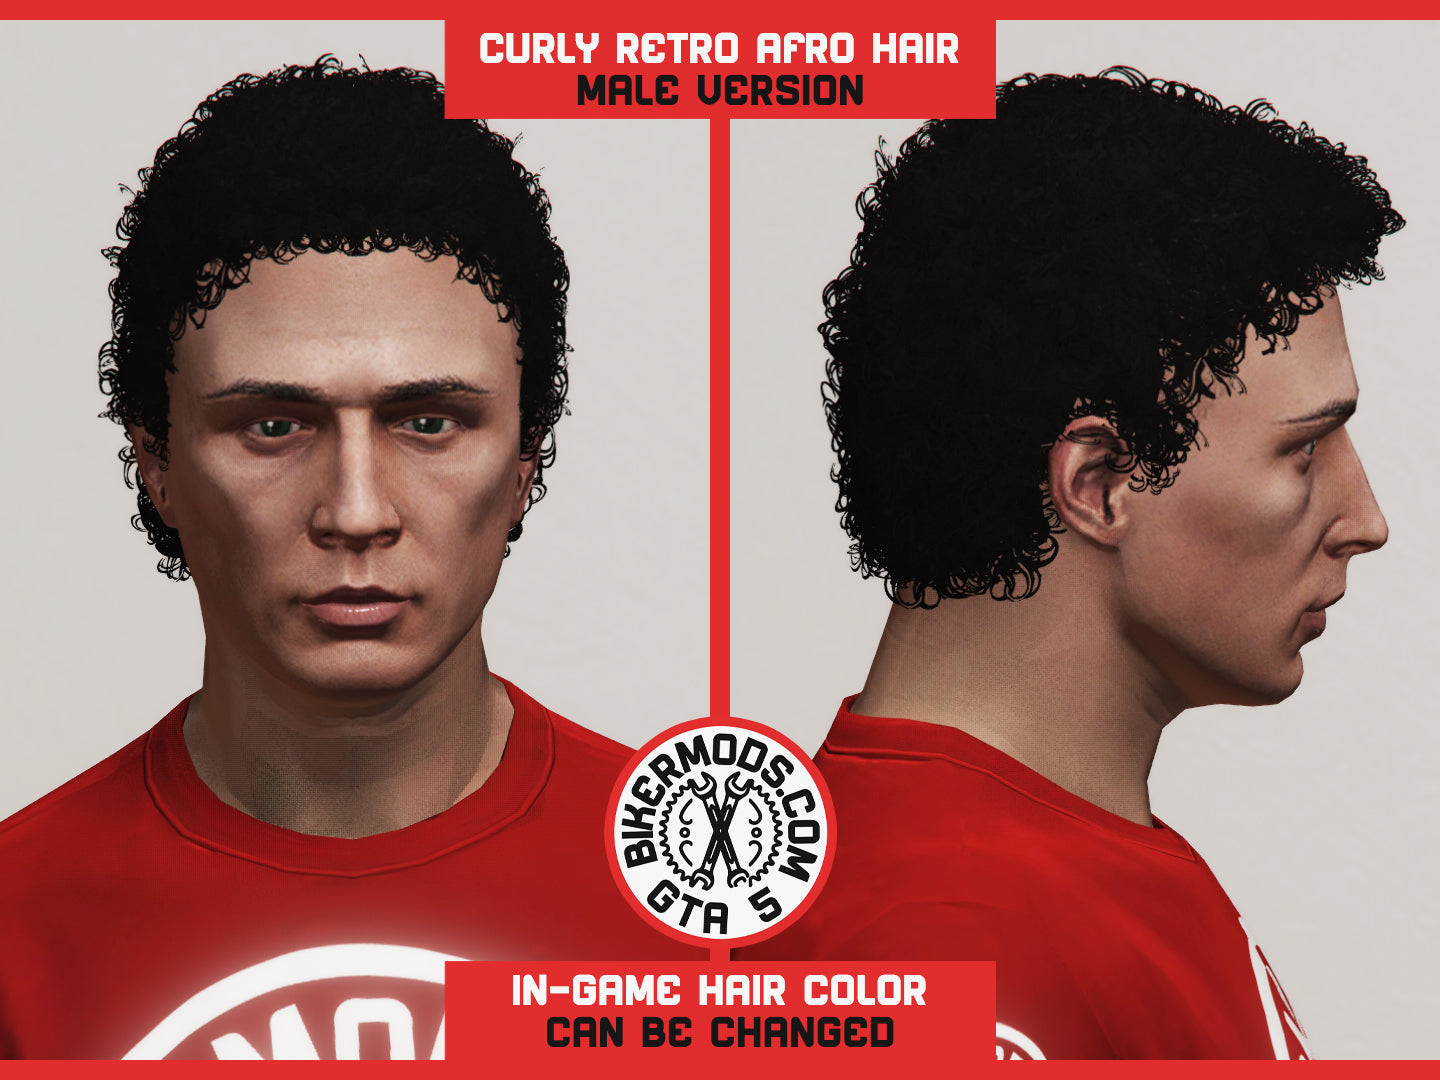 Curly Retro Afro Hair